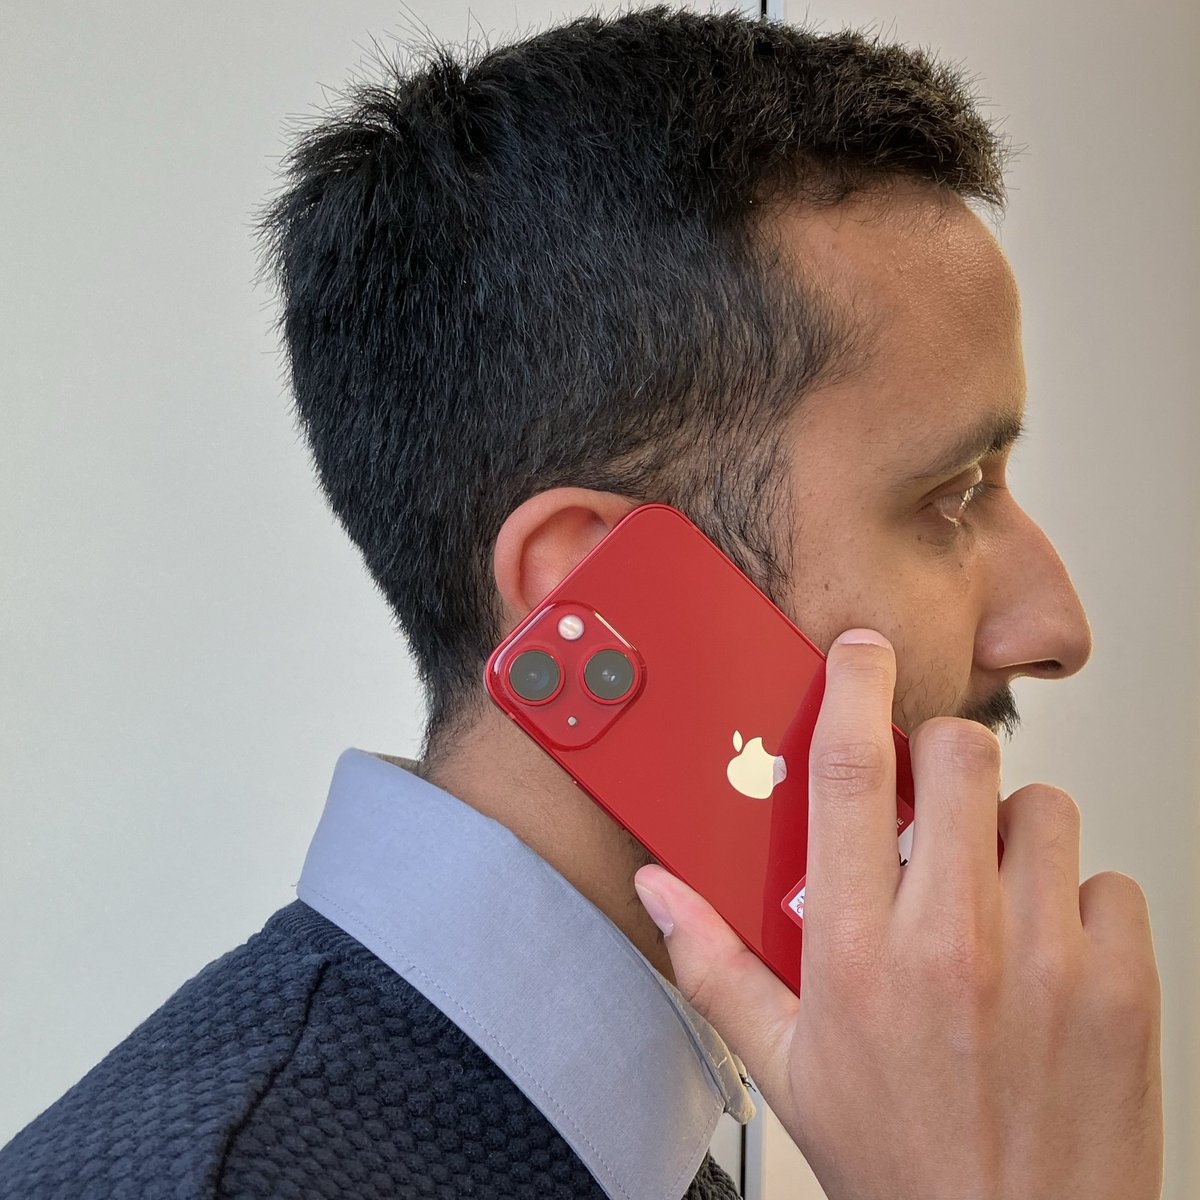 It's always important to us that we support the community and those that need our help when we can. This year, we chose to introduce (Product) RED iPhones to the company, helping to fight against AIDs and provide life changing treatments to those with HIV. #WorldAIDSDay